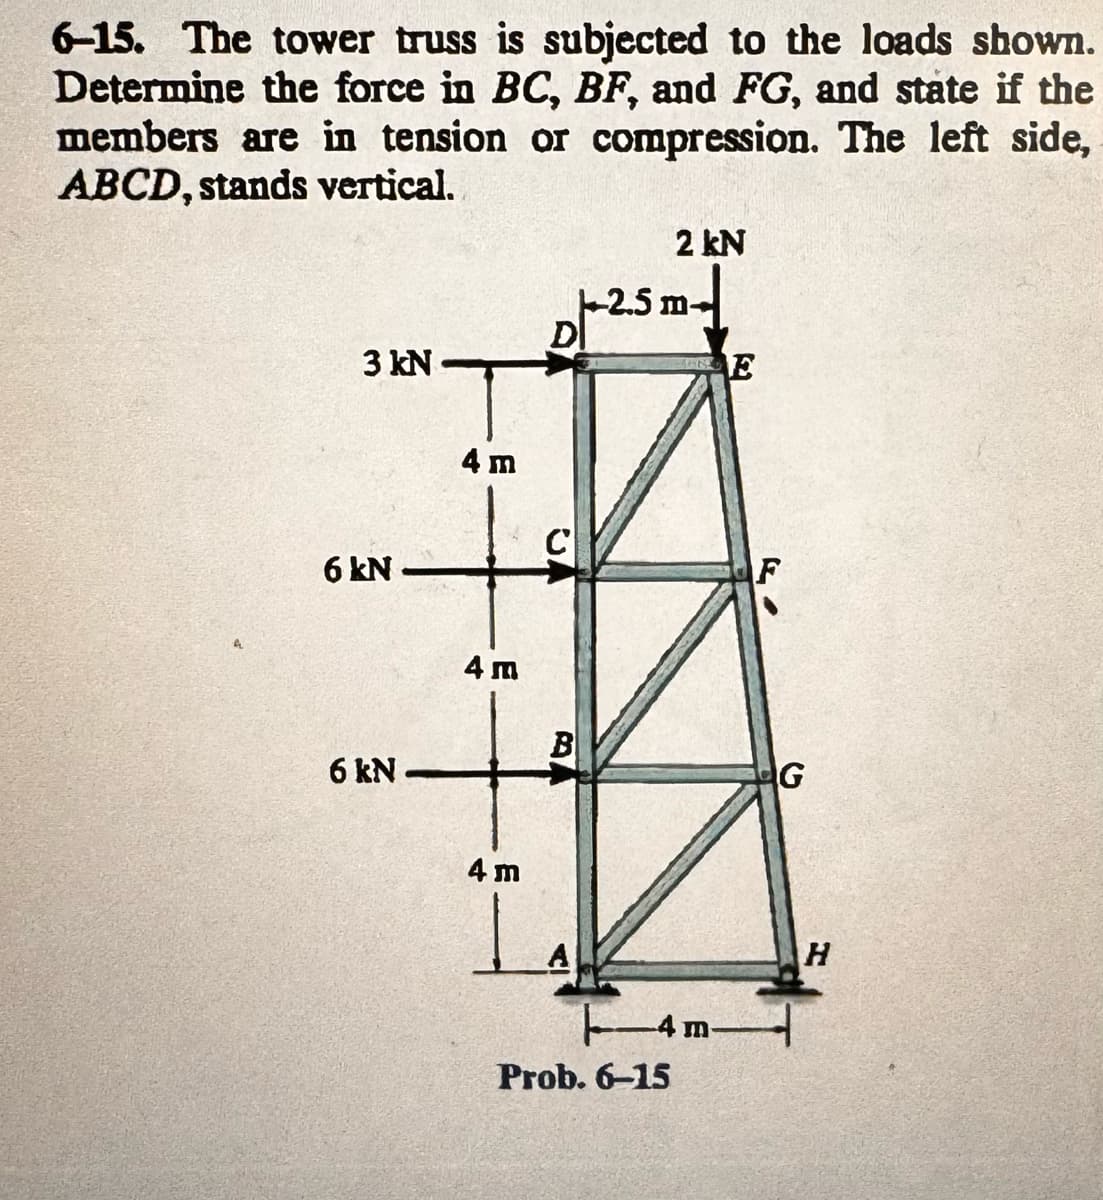 6-15. The tower truss is subjected to the loads shown.
Determine the force in BC, BF, and FG, and state if the
members are in tension or compression. The left side,
ABCD, stands vertical.
3 kN
6 kN
6 kN
4 m
4 m
4 m
D
C
B
2 kN
-2.5 m-
-4 m-
Prob. 6-15
E
F
G
H